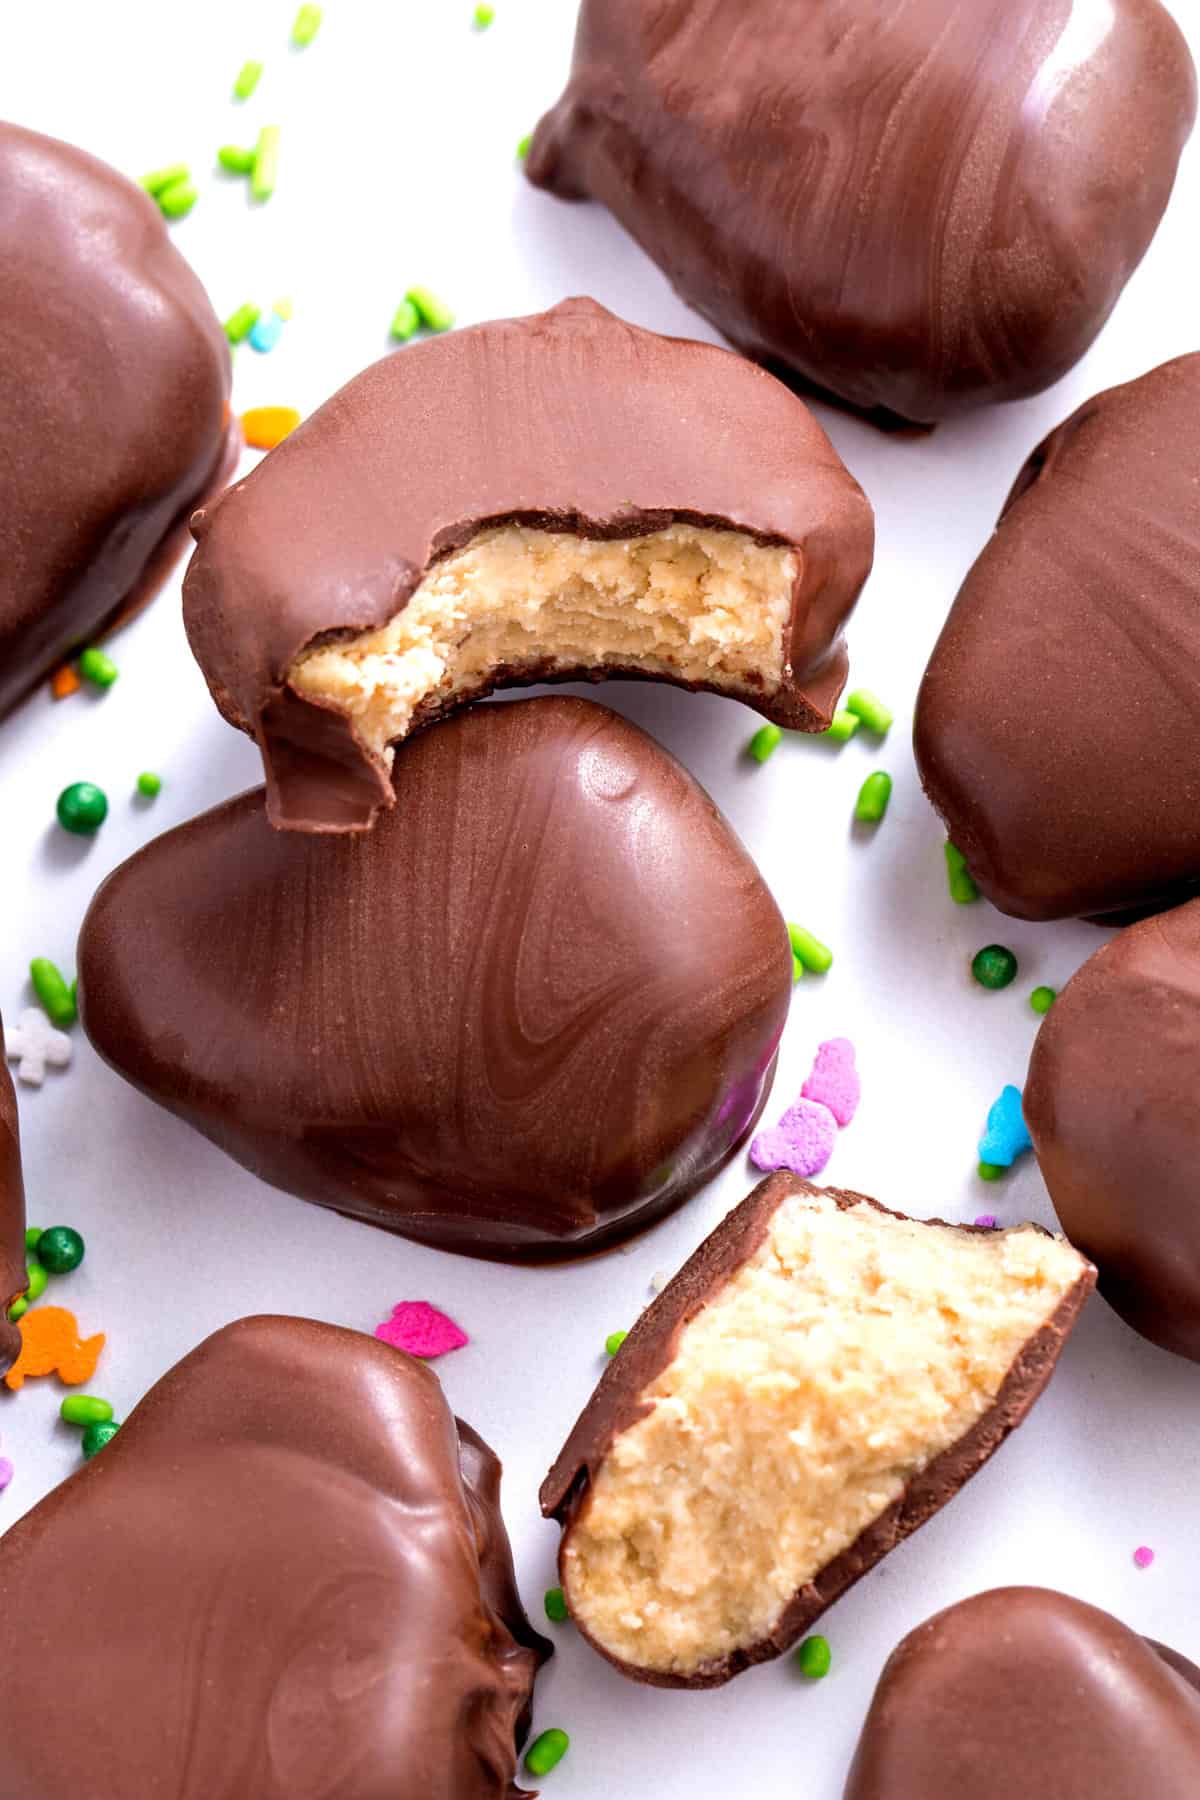 several homemade chocolate peanut butter eggs with sprinkles on the table for decoration